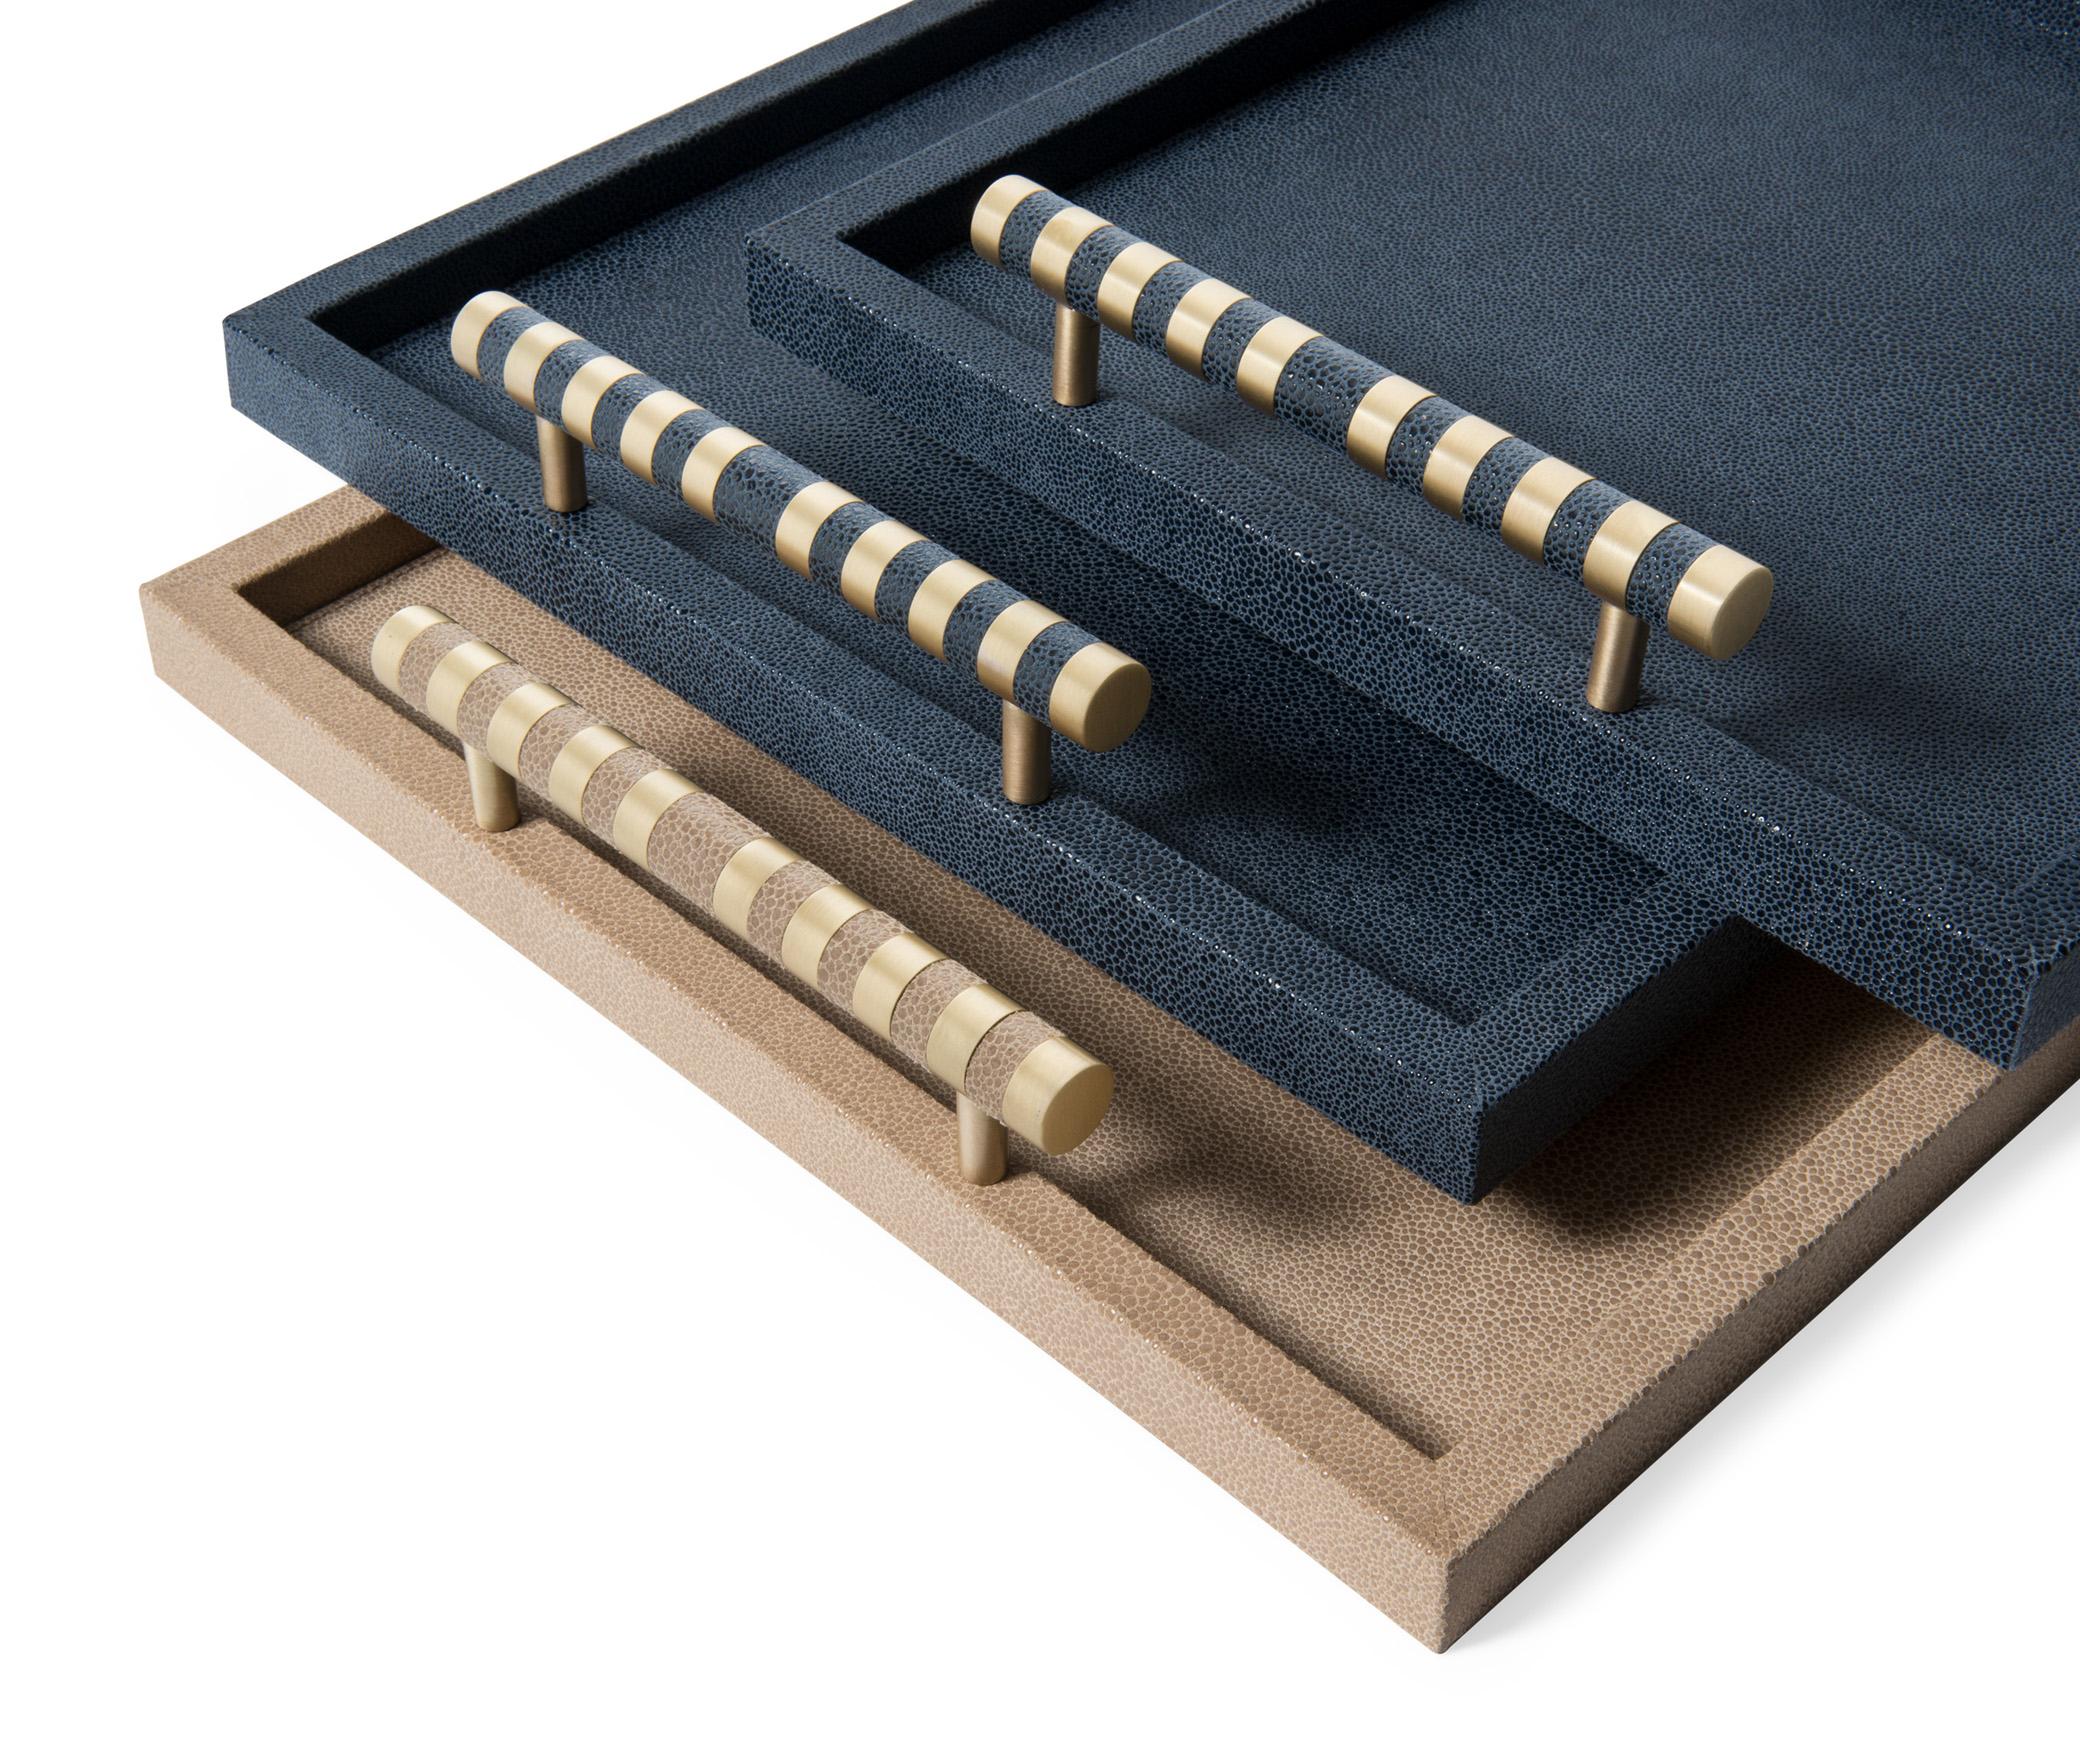 Luxury, refinement, and beauty.

Saturno collection is a set of trays crafted with a luxurious shagreen embossed effect, beautiful finished by satin brass or chrome handles with matching leather accents. The perfect addition to any décor scheme.
 